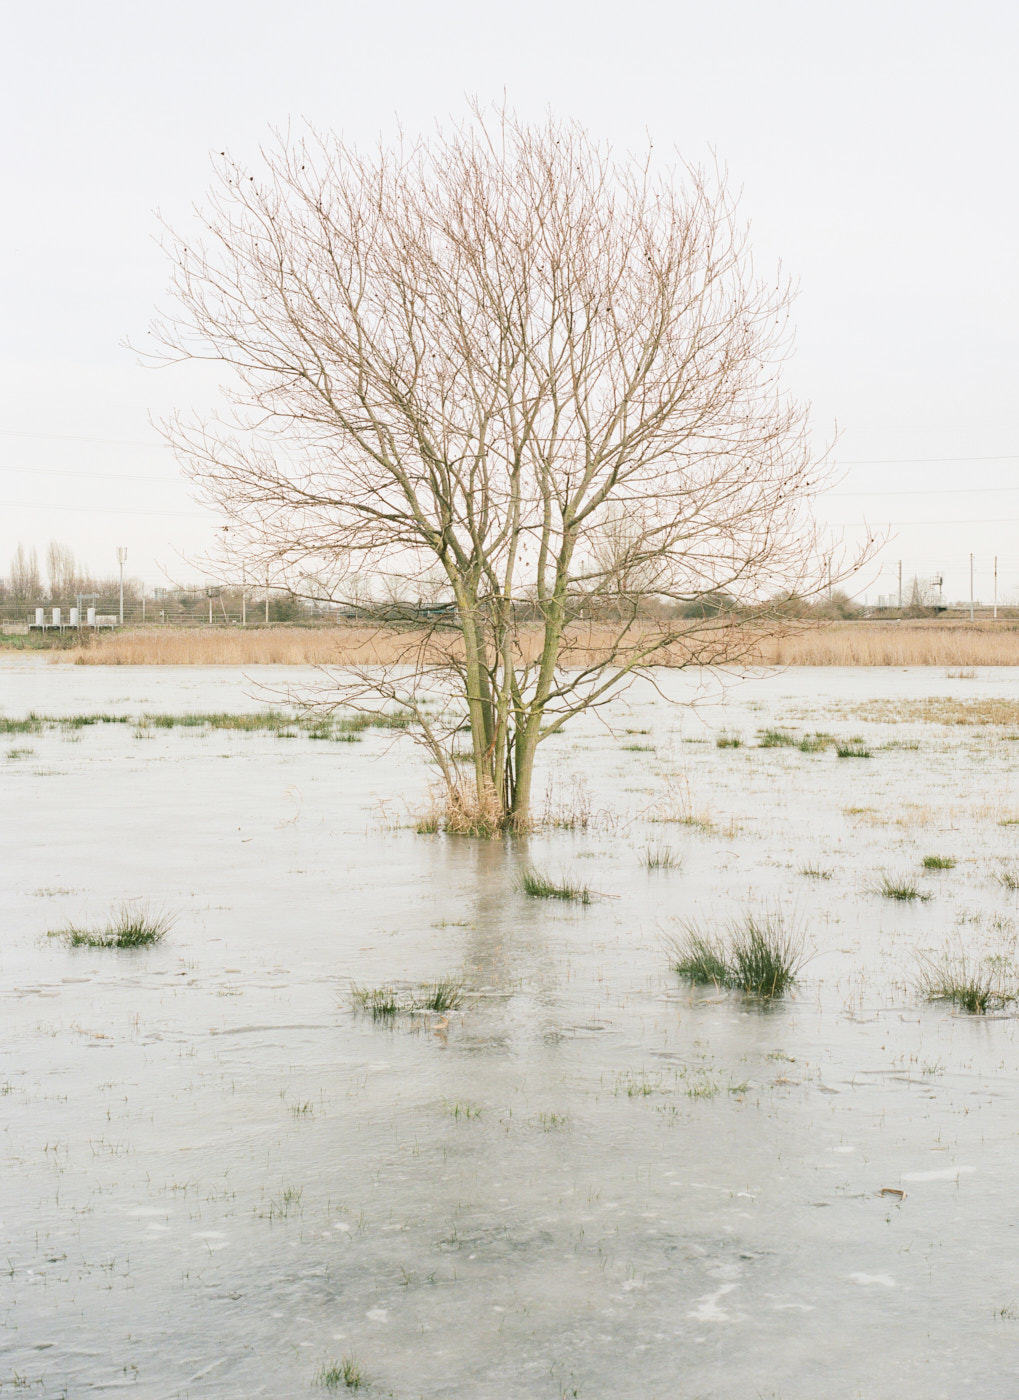 Walthamstow Marshes, flooded and frozen